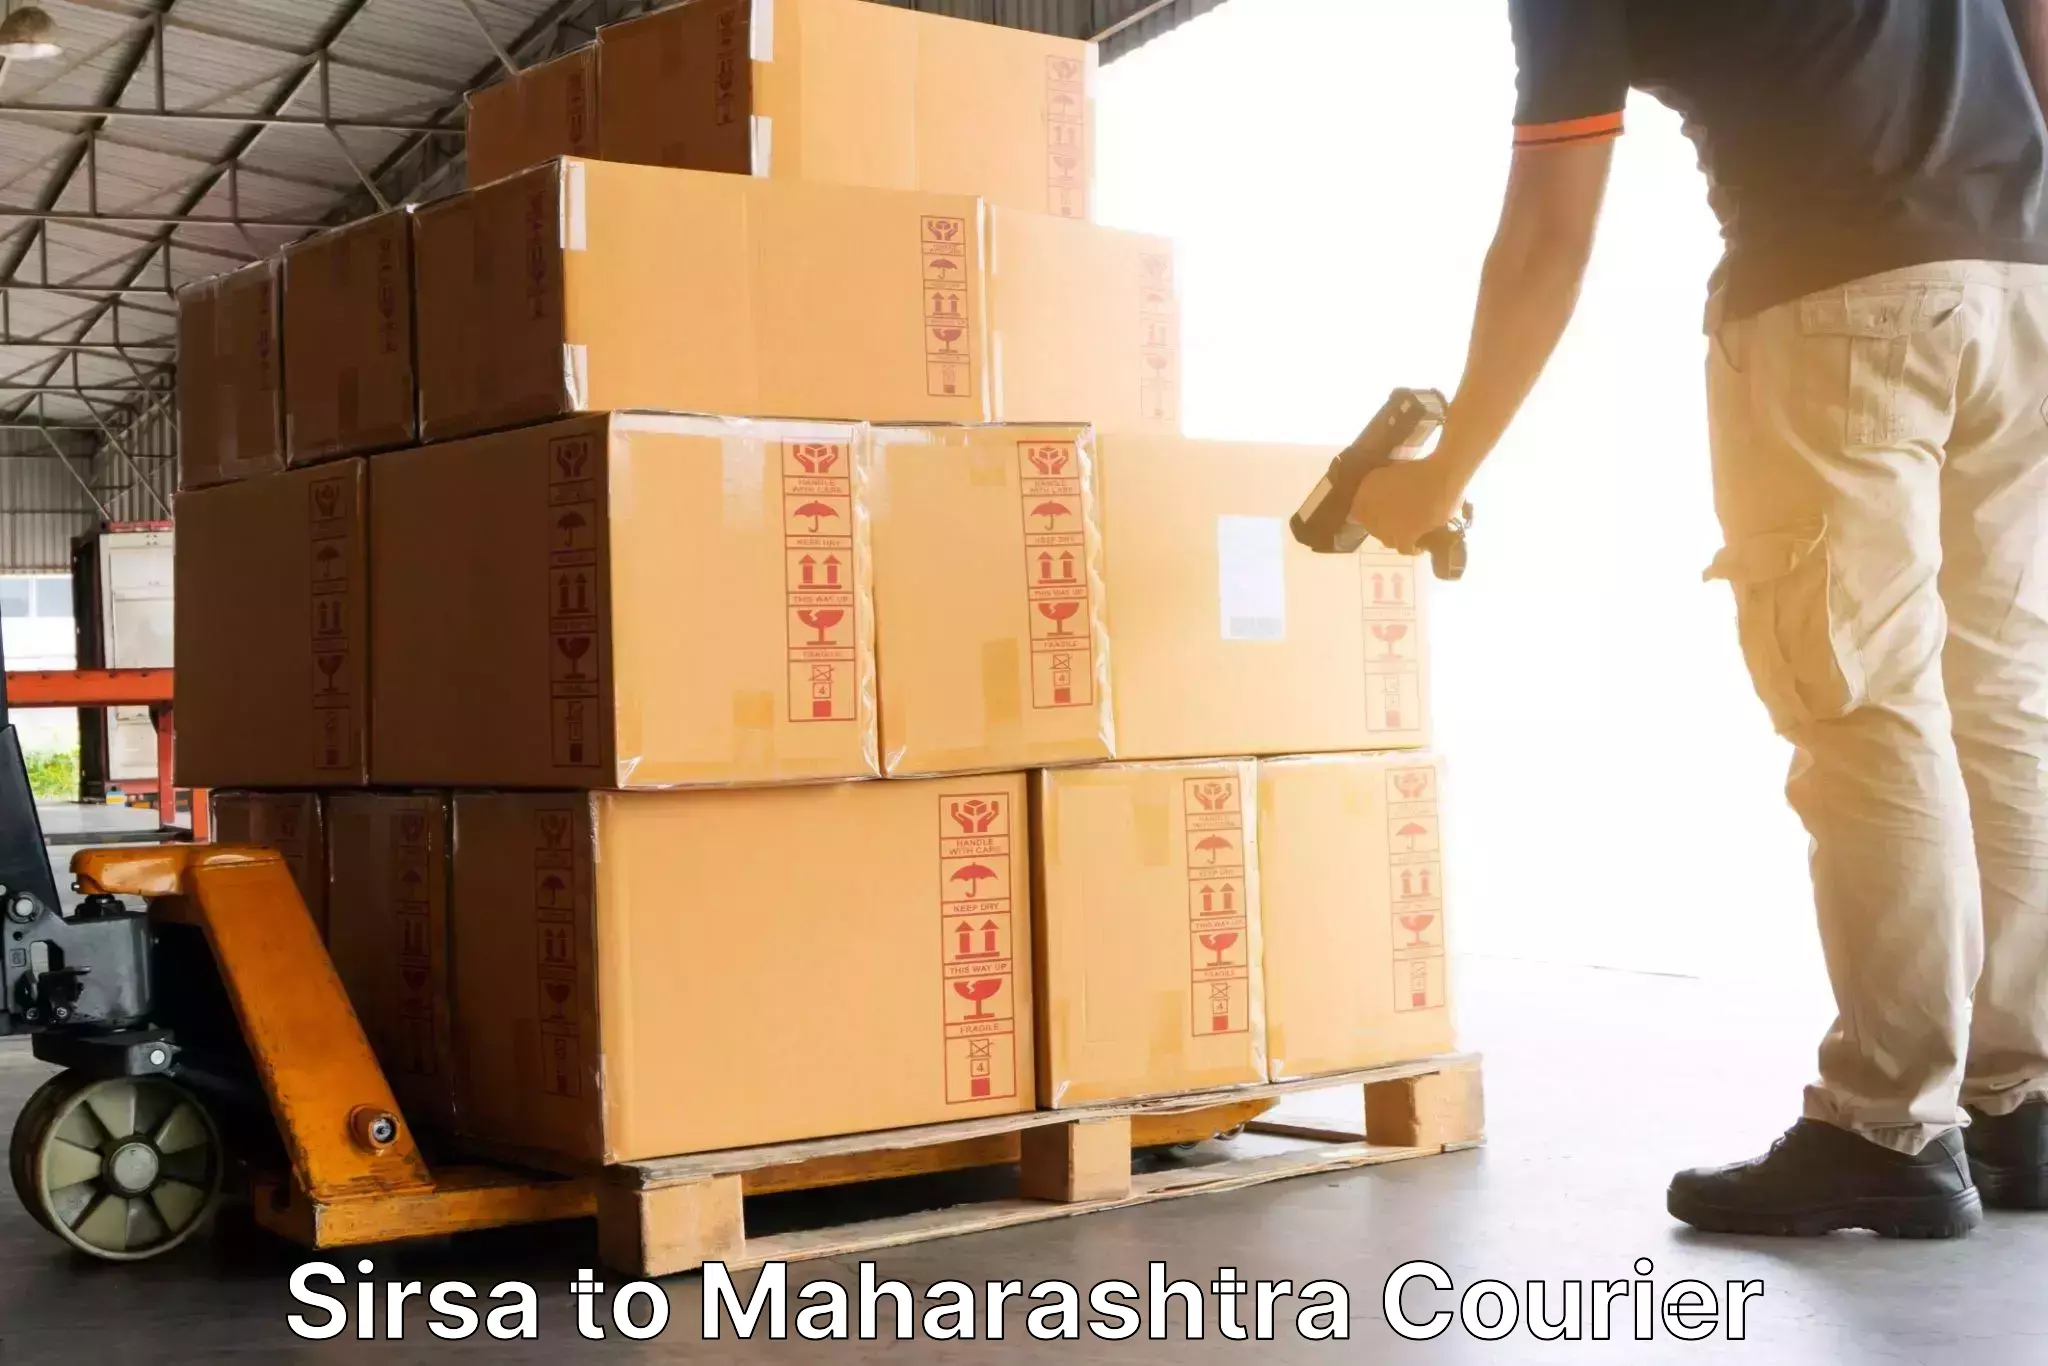 Parcel service for businesses Sirsa to Jalgaon